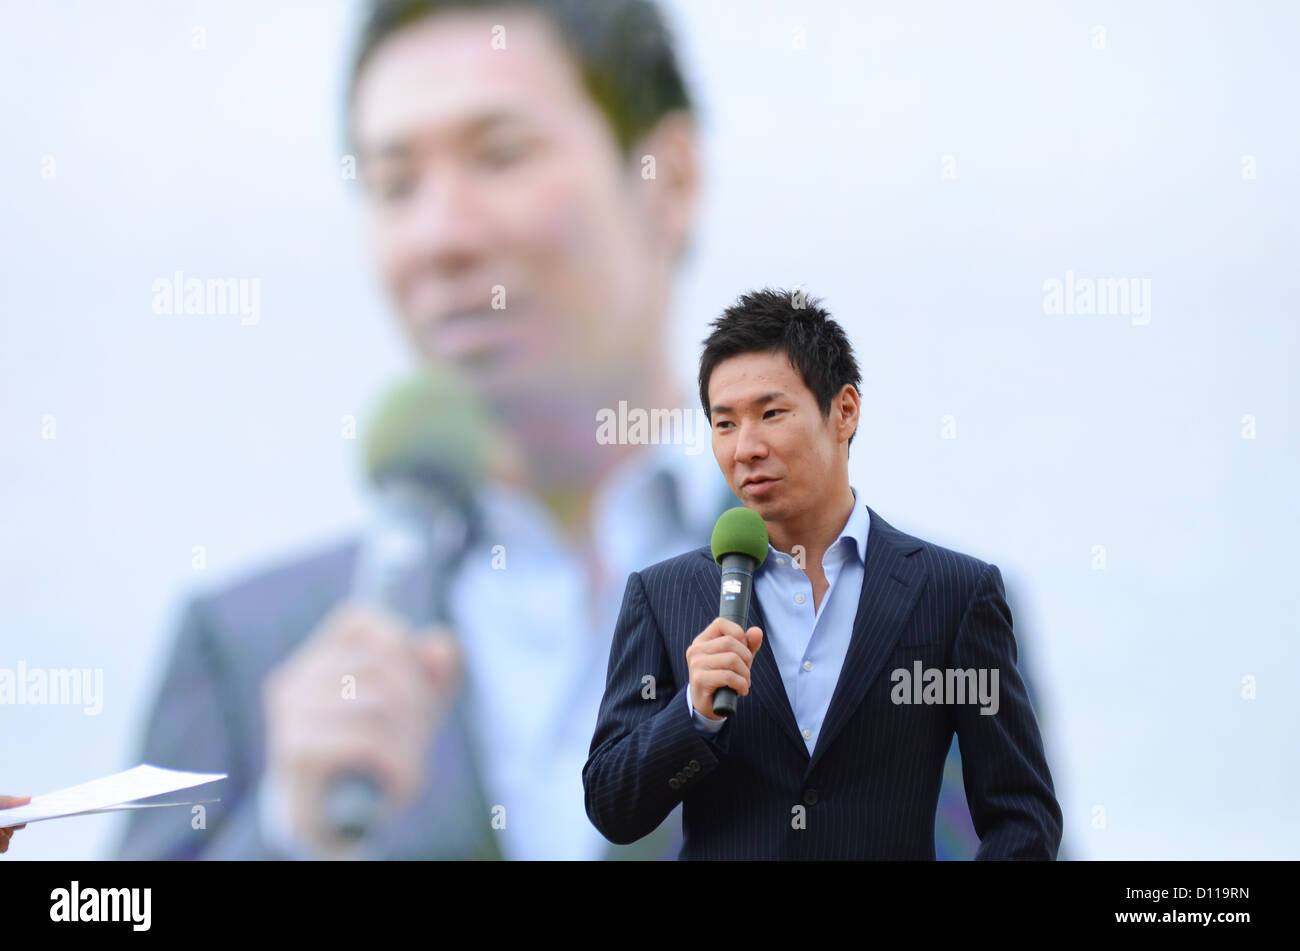 Japanese racing driver Kamui Kobayashi speaks during a special appearance at Hanshin racecourse in Japan on 2nd December, 2012. Stock Photo